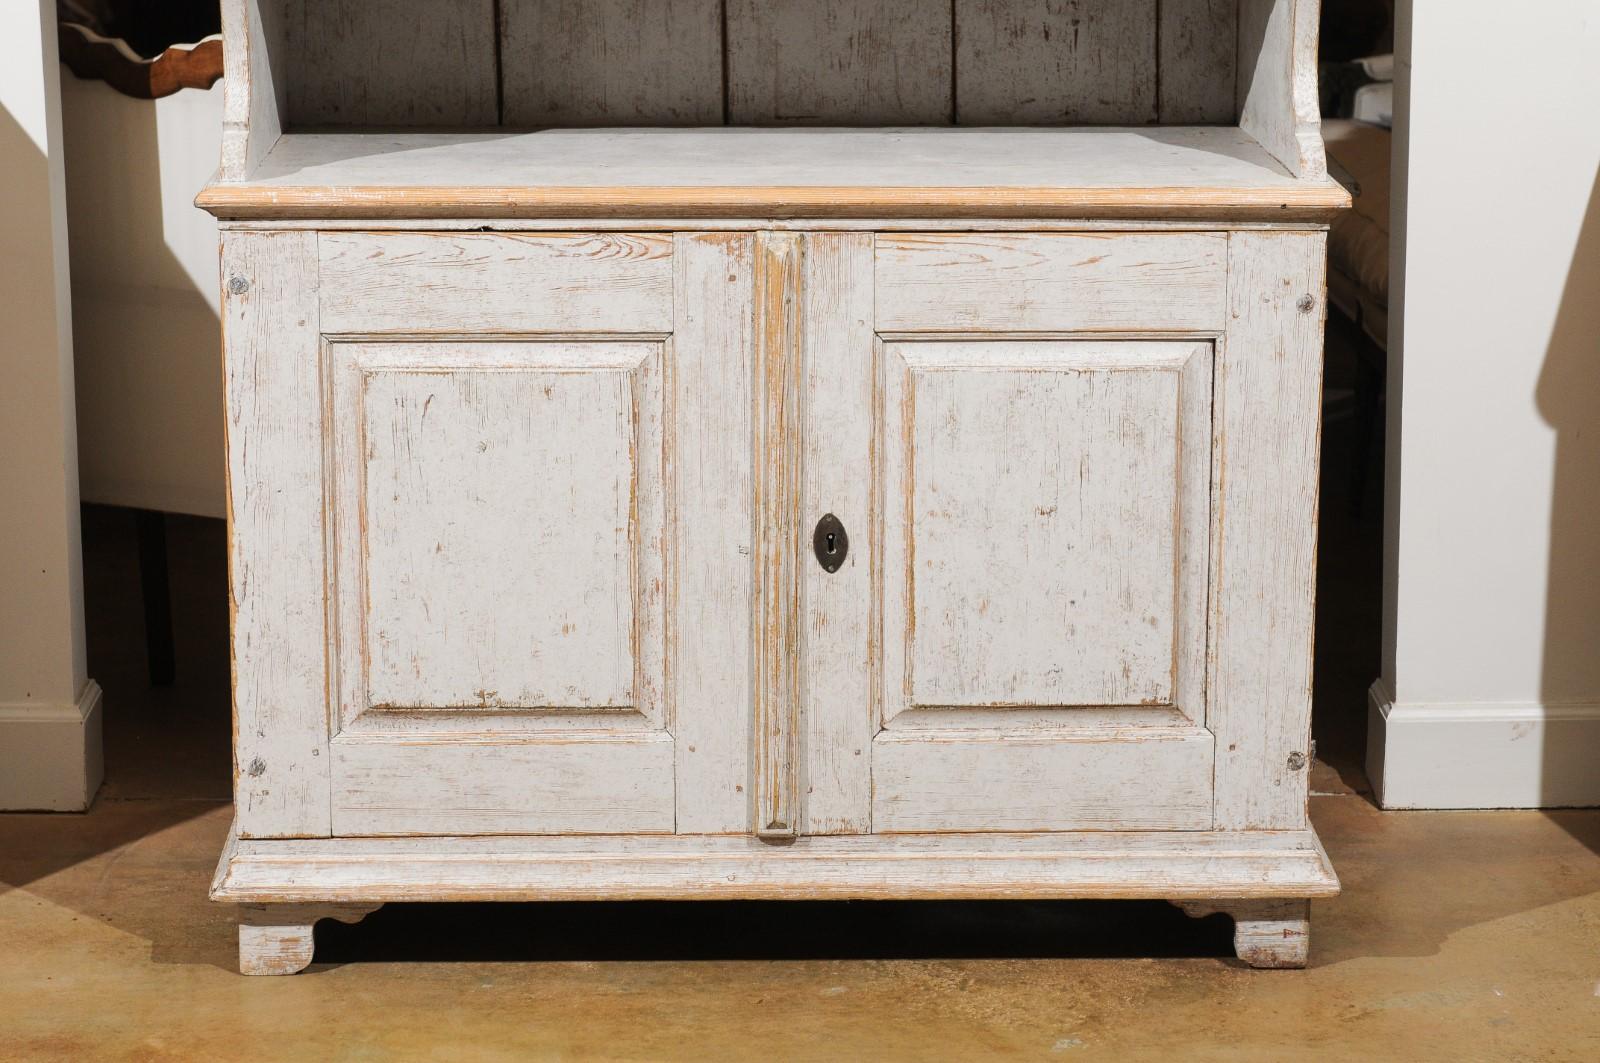 19th Century Swedish Two-Part Painted Cabinet from Värmland with Broken Pediment, circa 1834